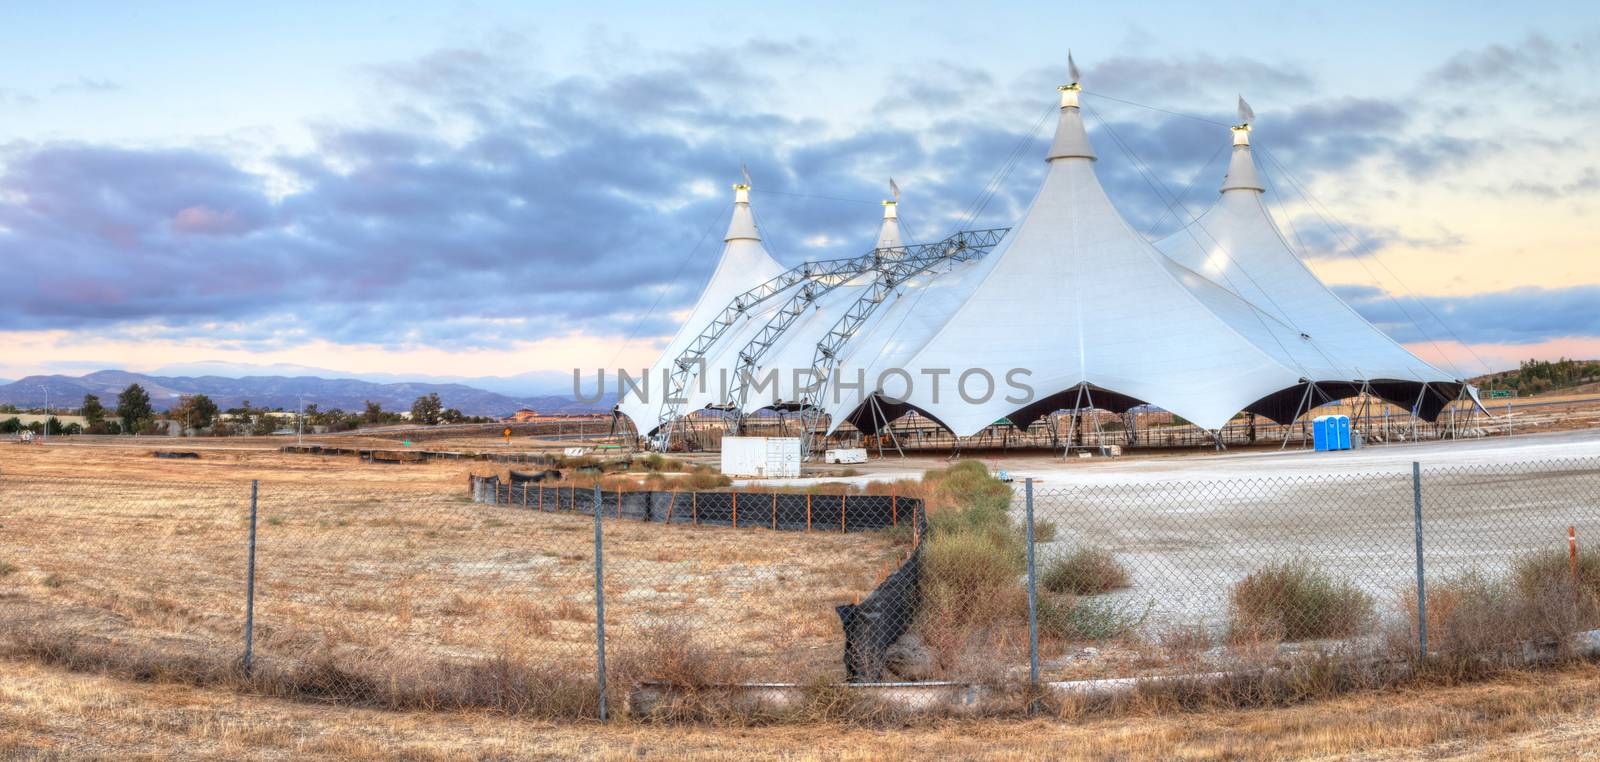 Sunset over a circus tent by steffstarr